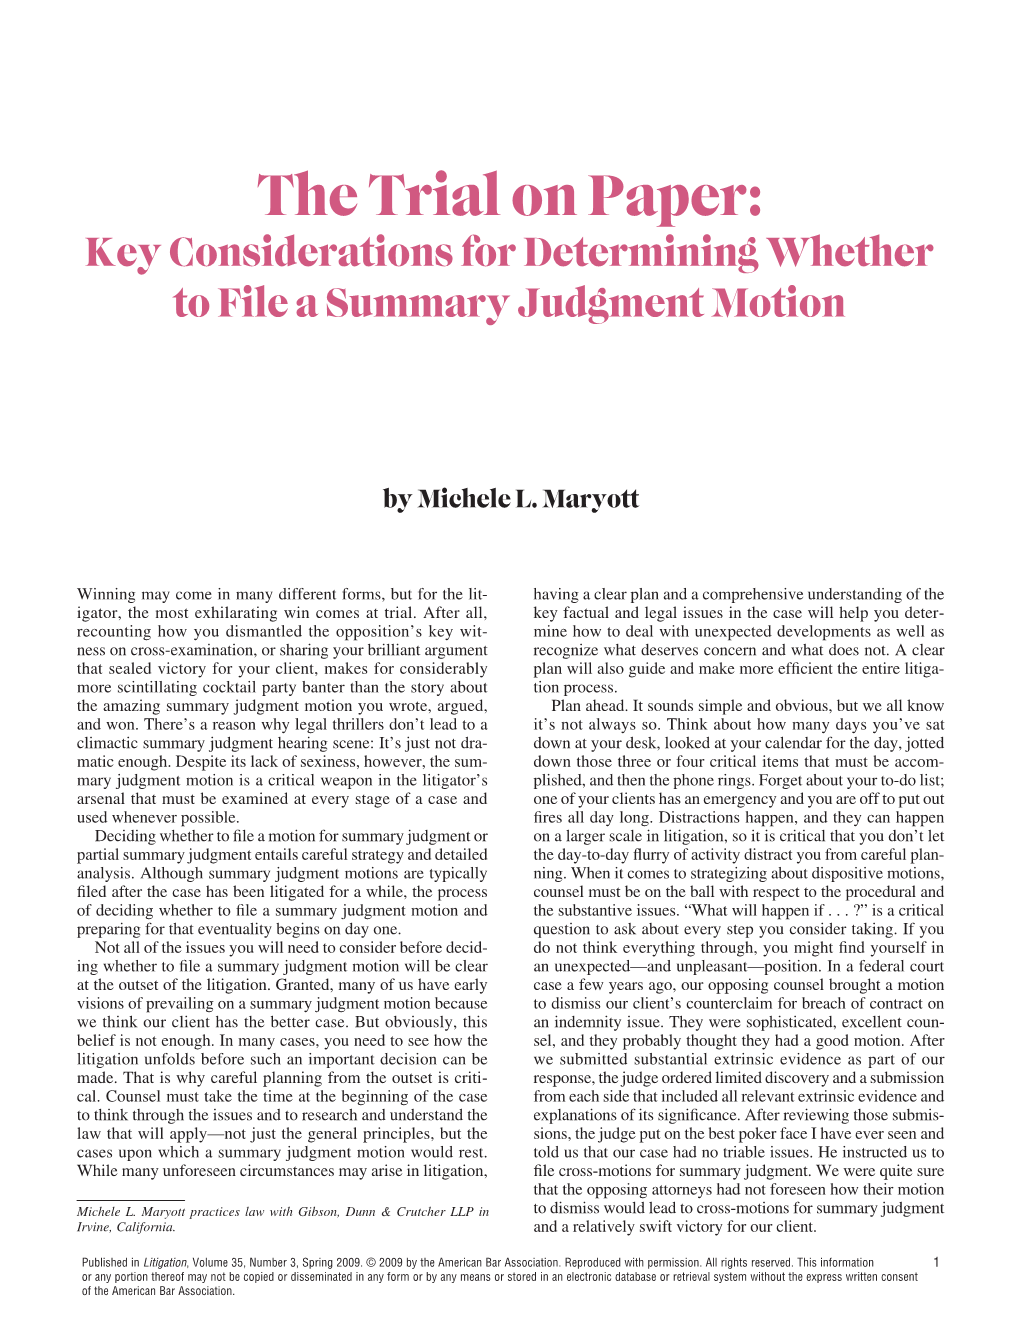 Key Considerations for Determining Whether to File a Summary Judgment Motion